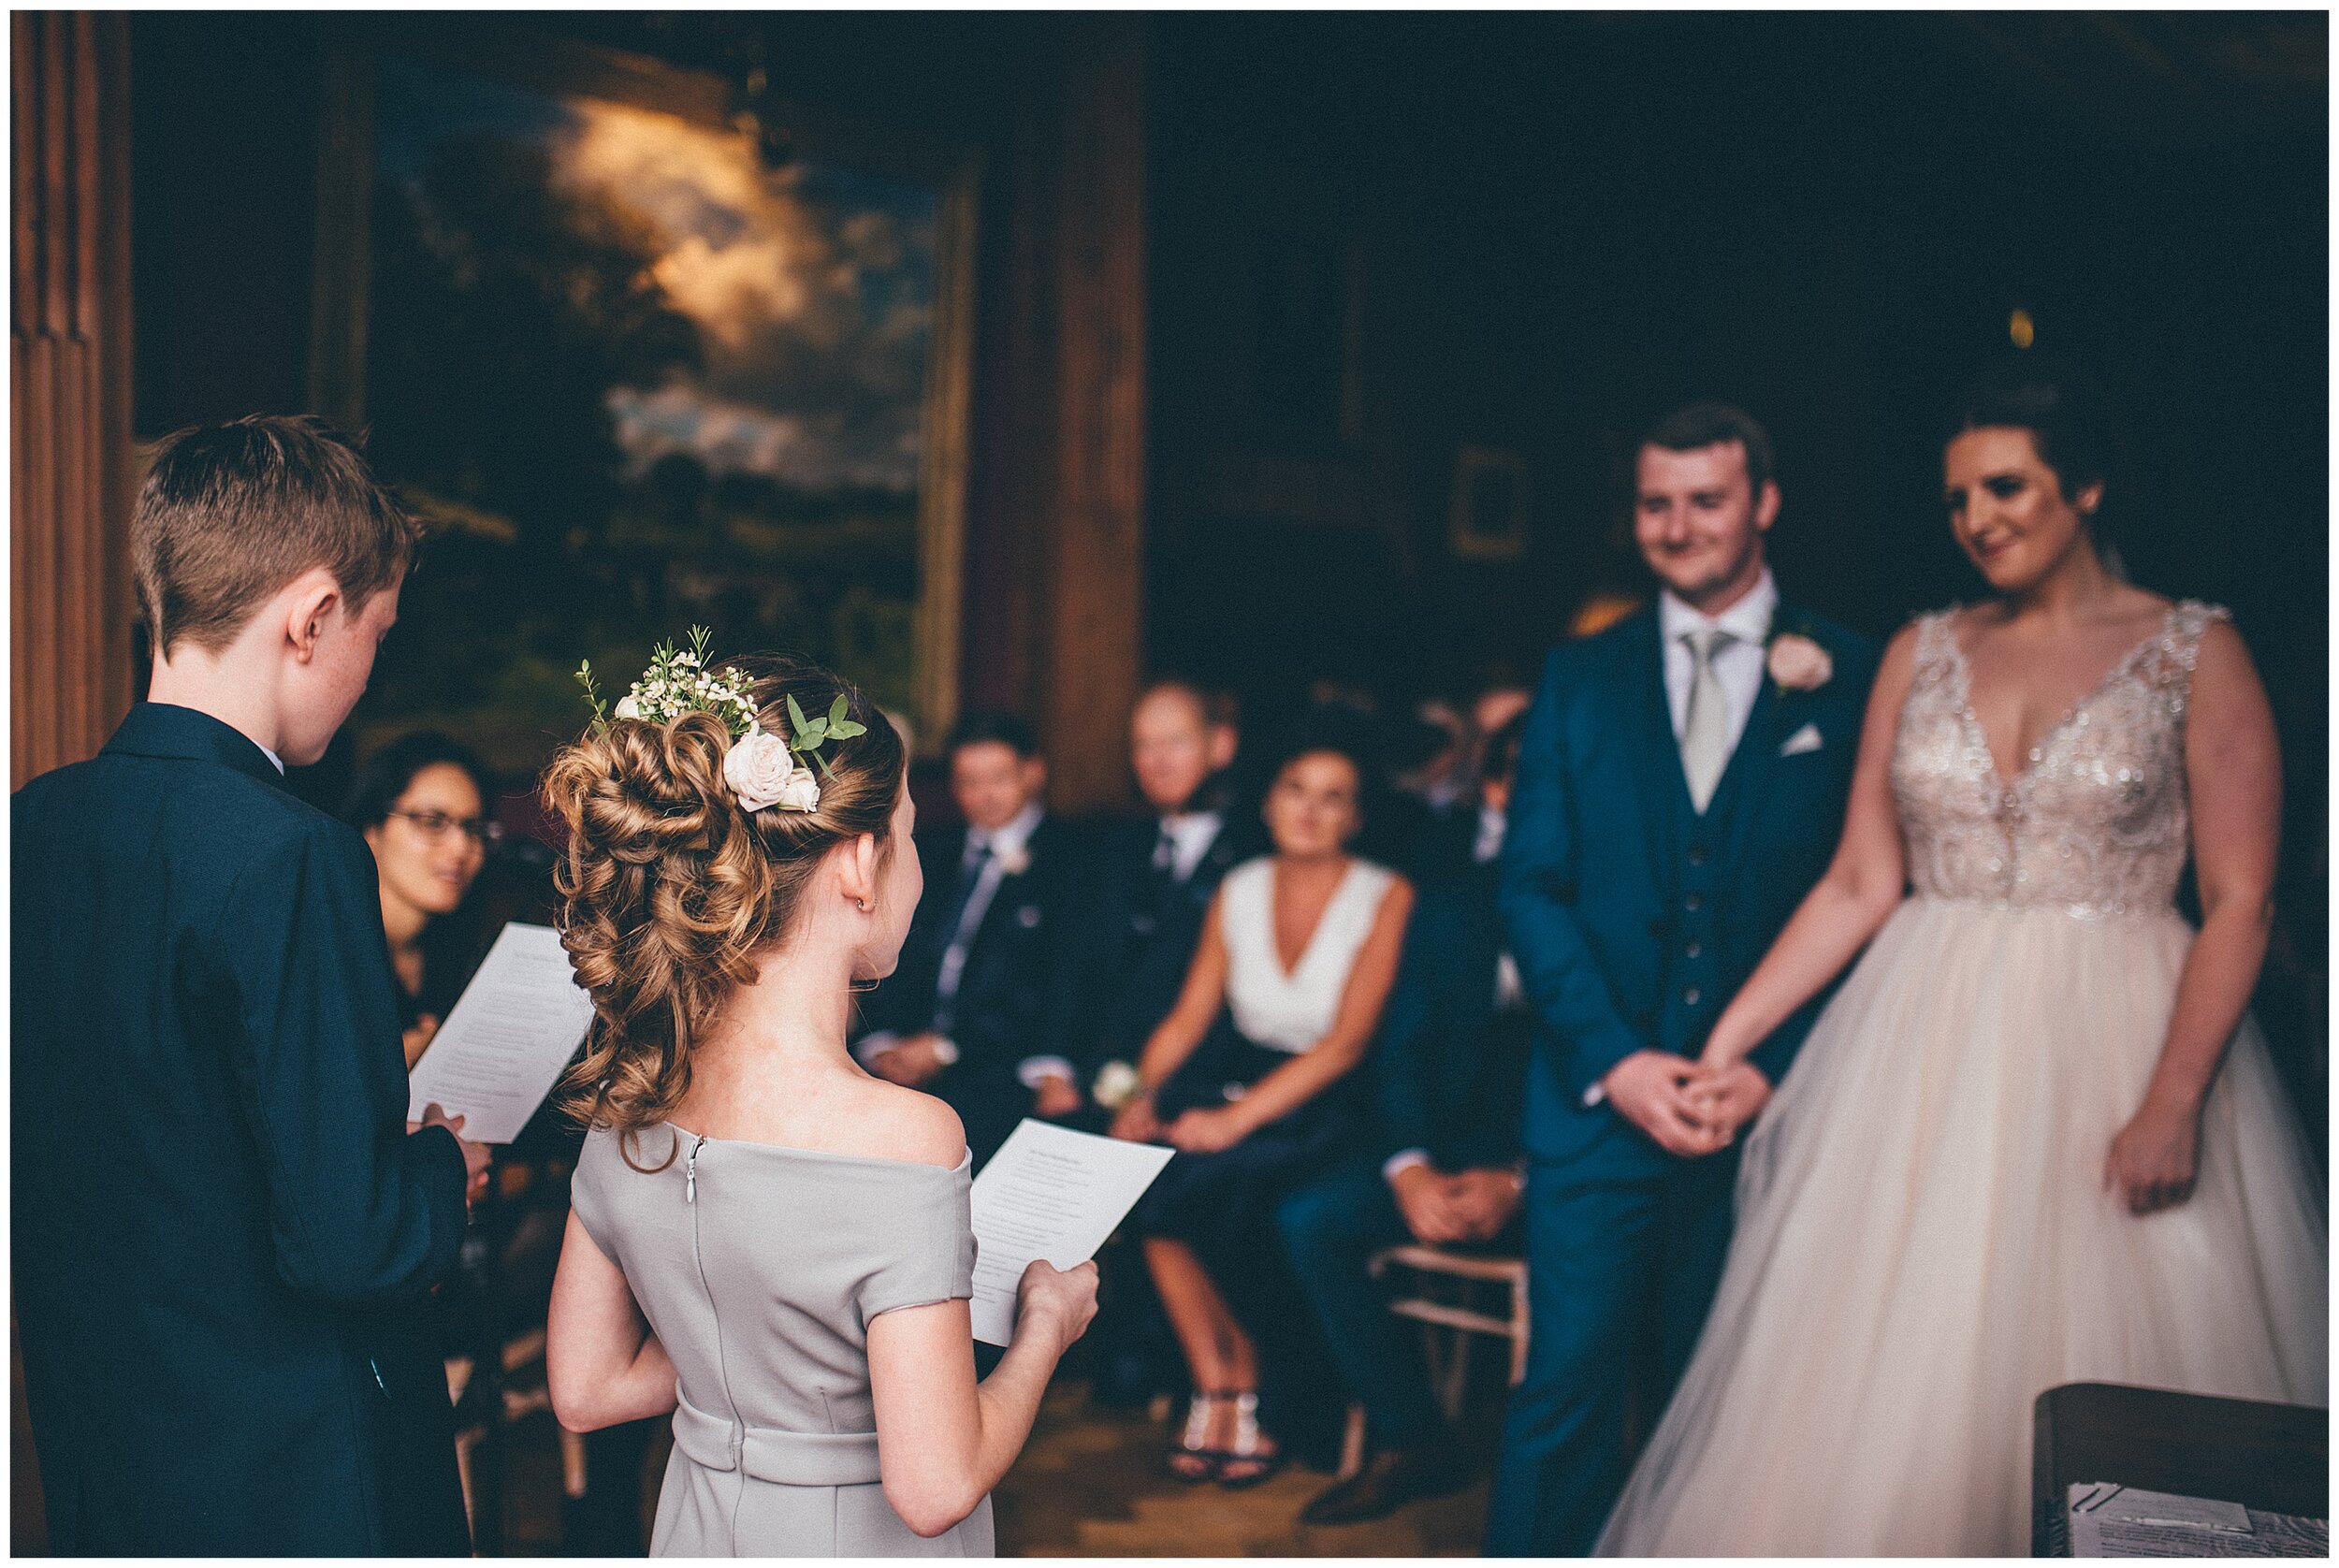 Laughter during the wedding ceremony at Thornton Manor in Cheshire.